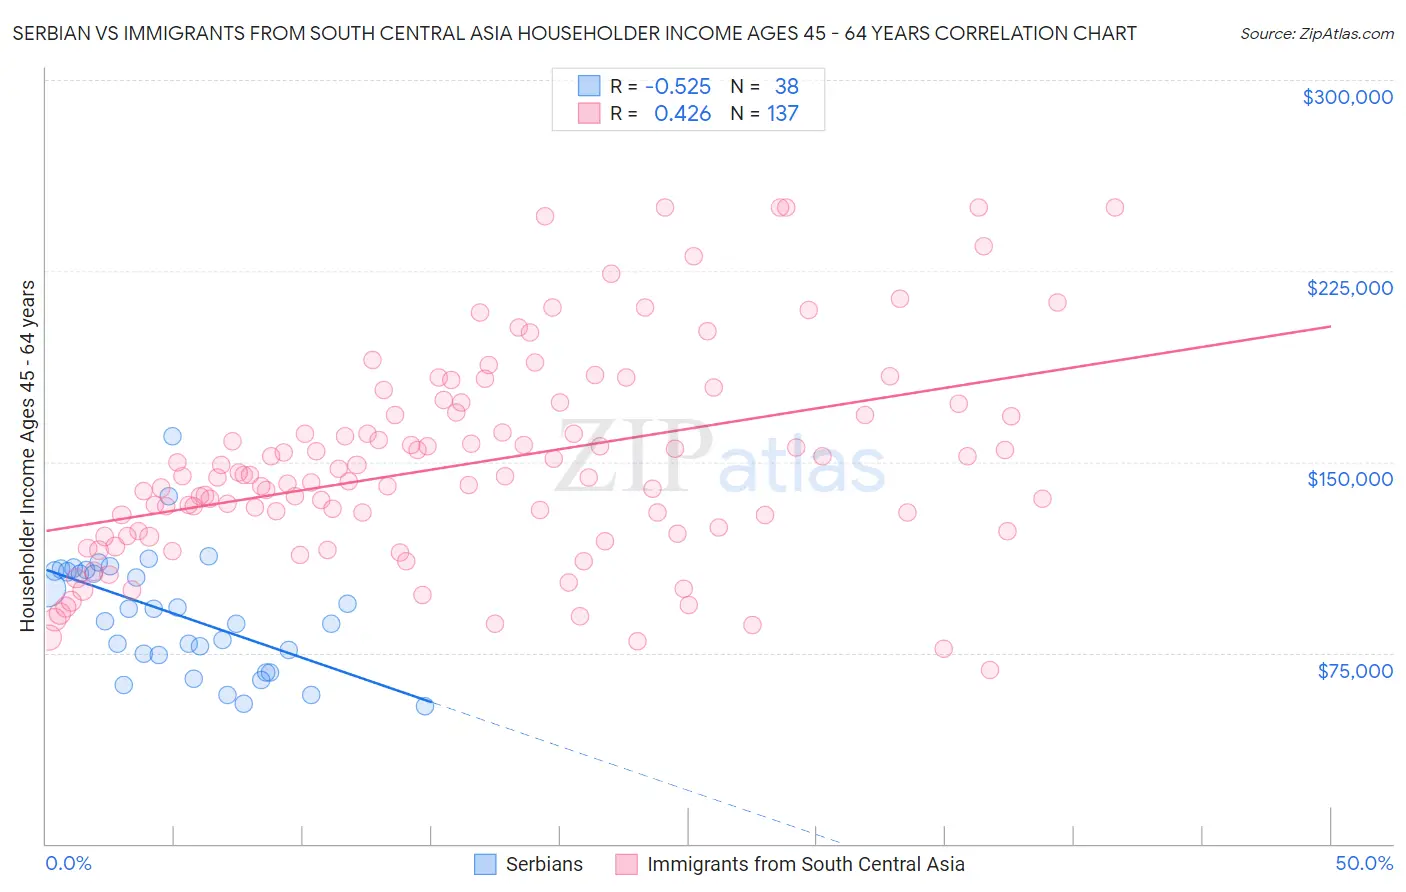 Serbian vs Immigrants from South Central Asia Householder Income Ages 45 - 64 years